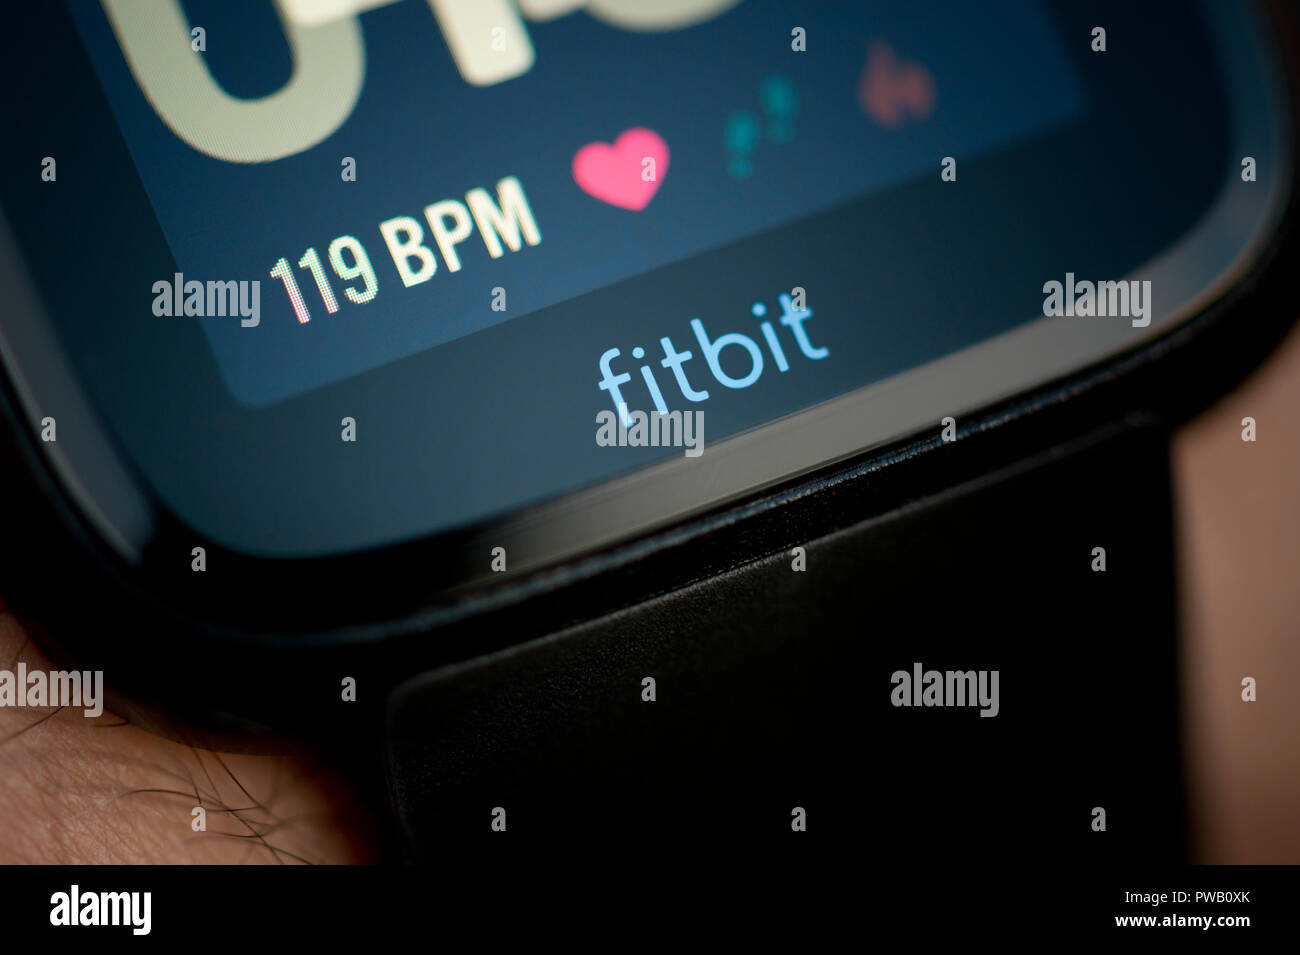 A men checks his Fitbit Versa activity tracker including heart rate monitor using BPM units during an exercise workout. Stock Photo